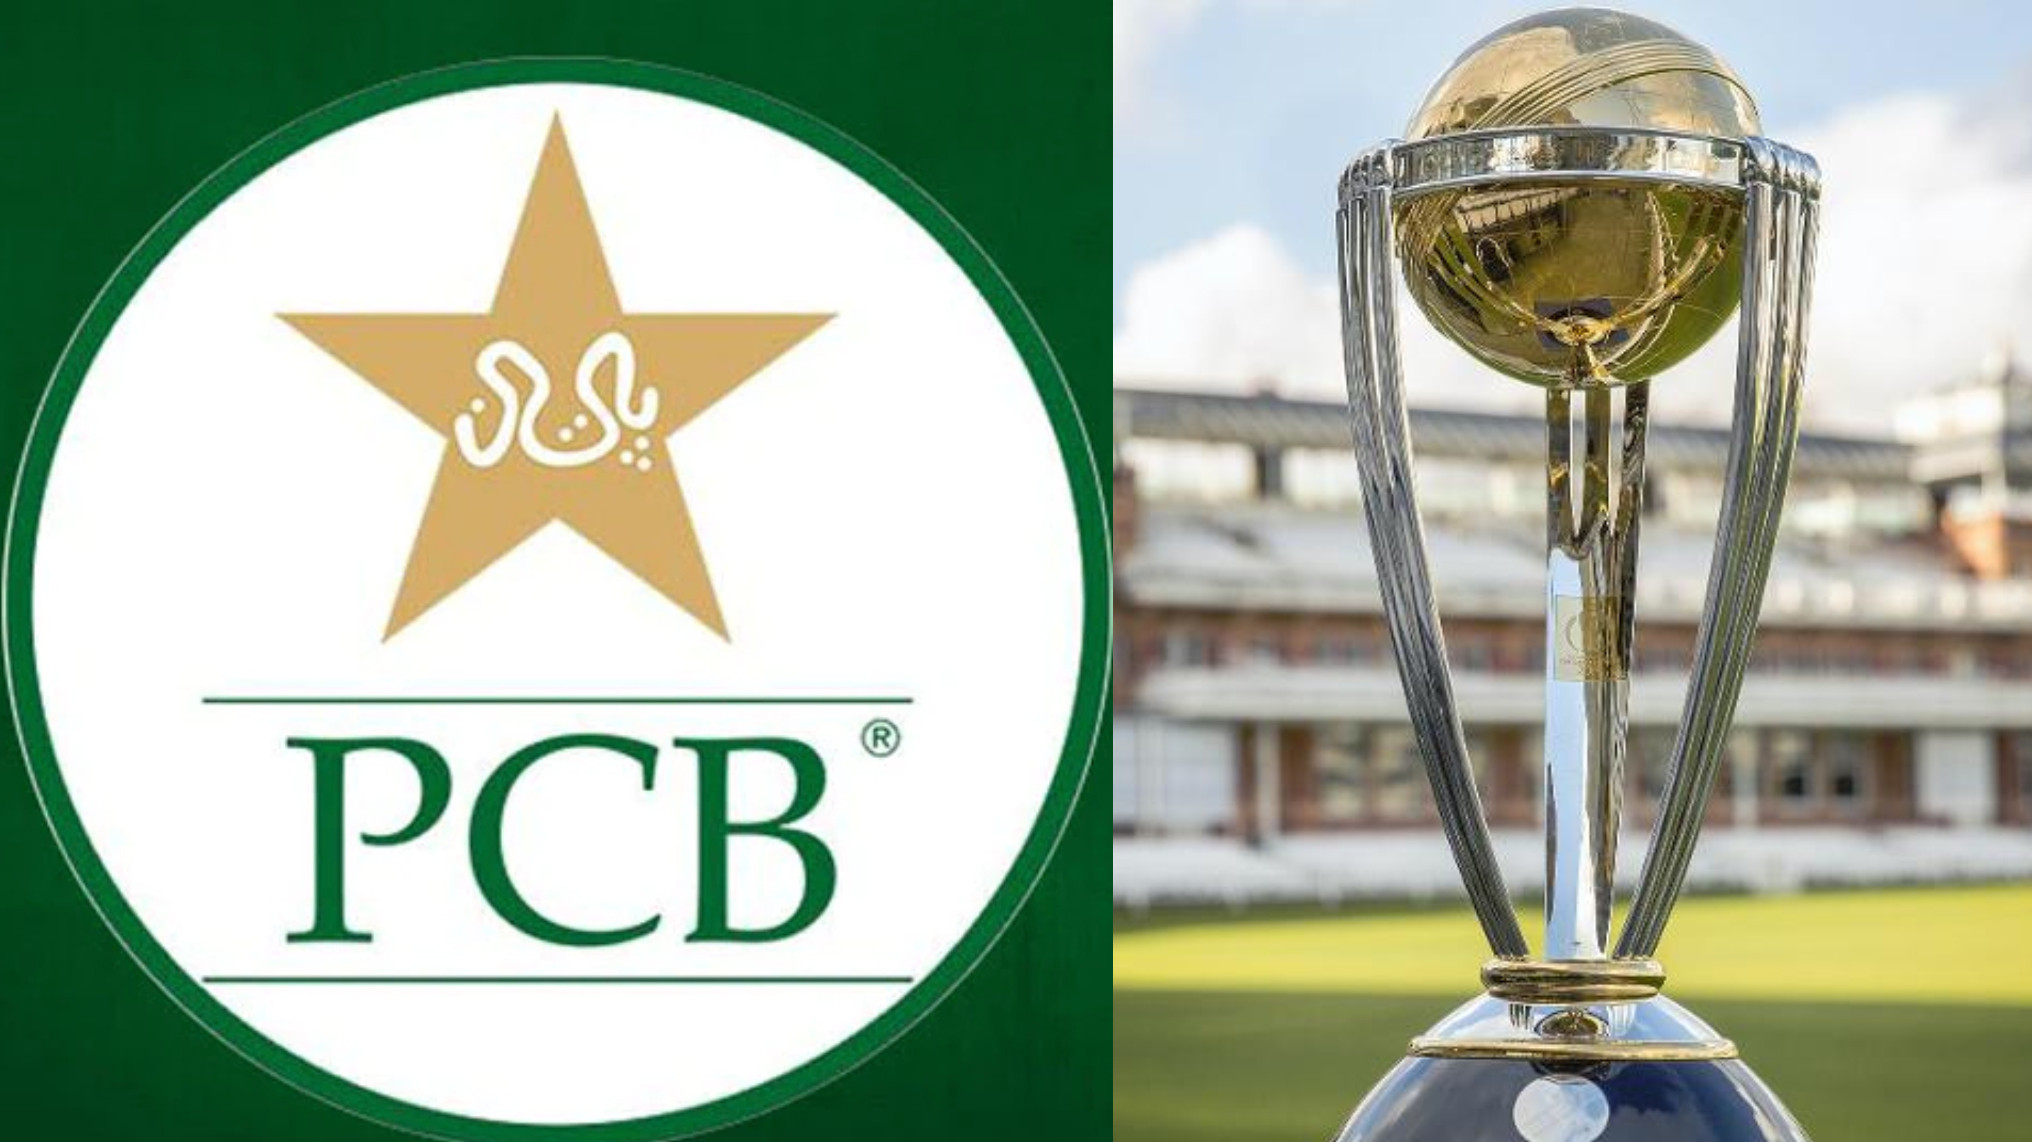 PCB assures ICC officials that no decision taken on boycotting 2023 World Cup in India- Report  